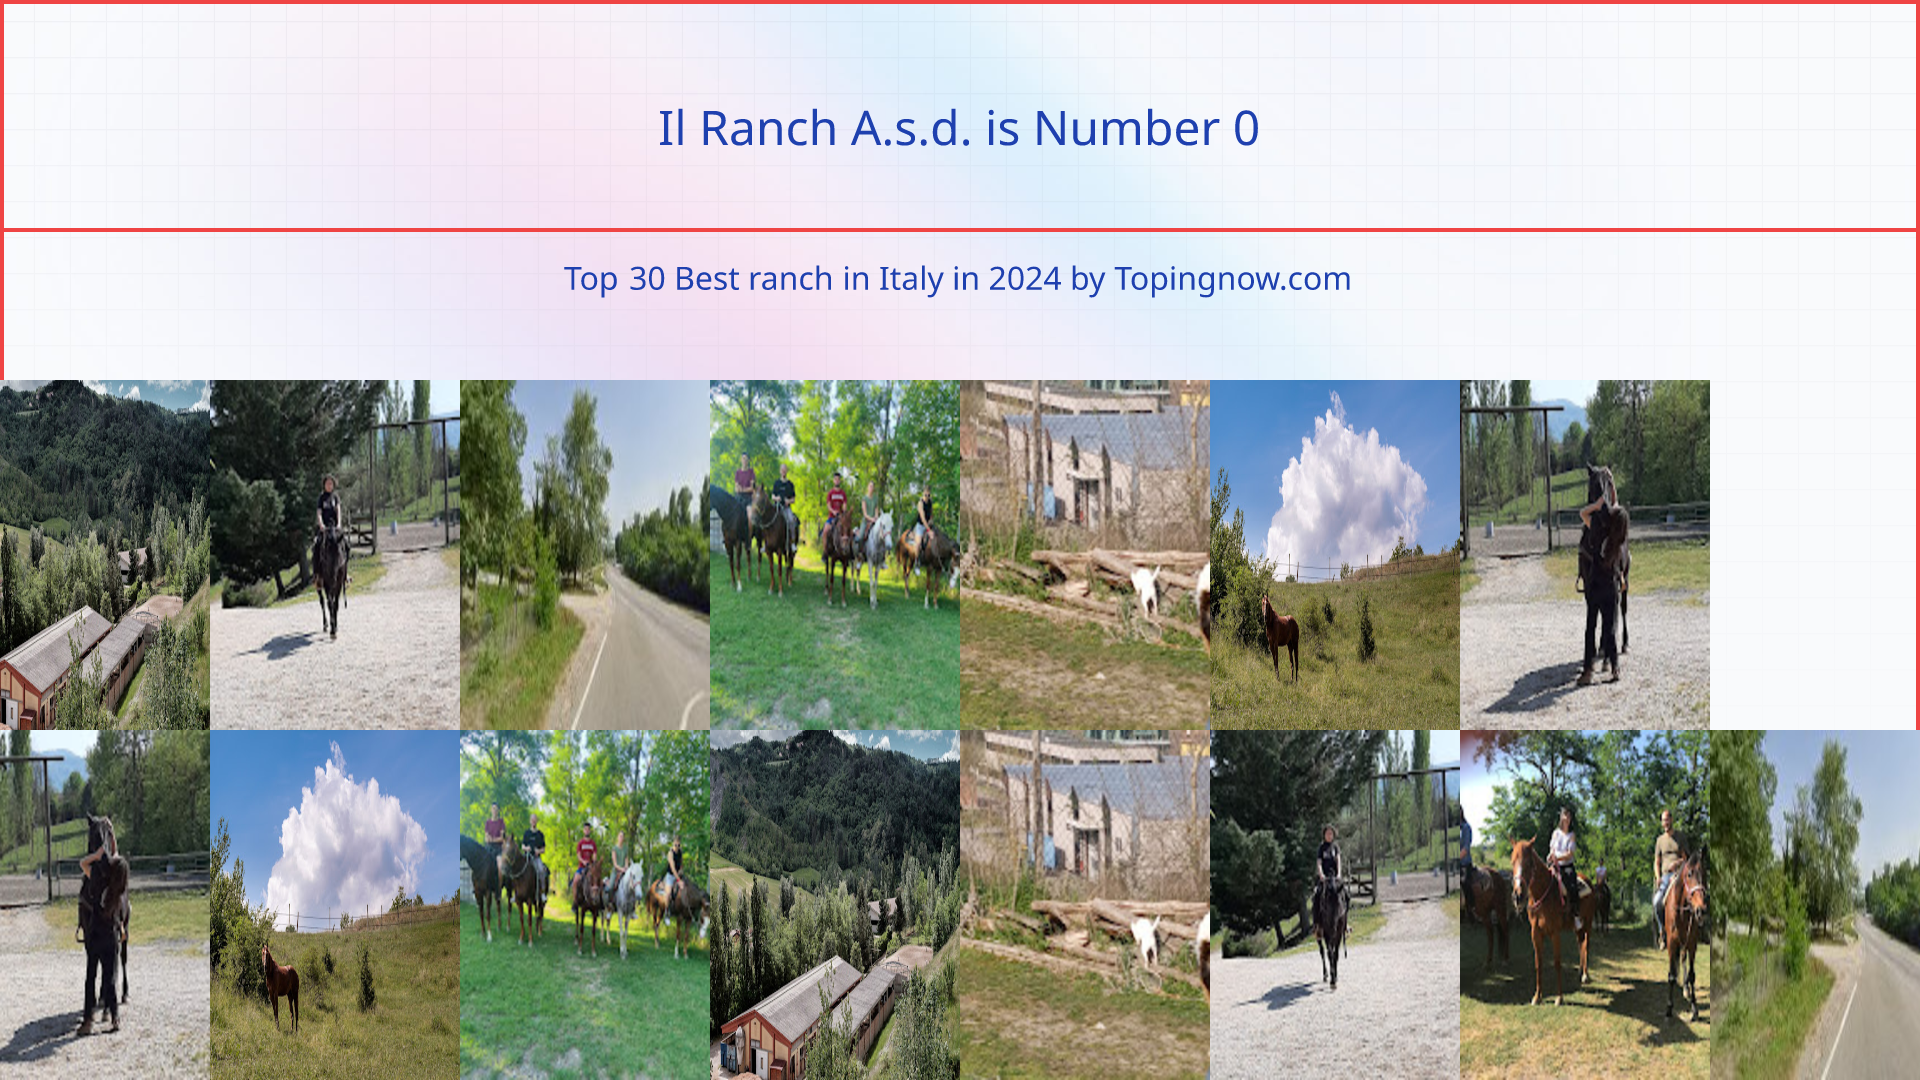 Il Ranch A.s.d.: Top 30 Best ranch in Italy in 2024